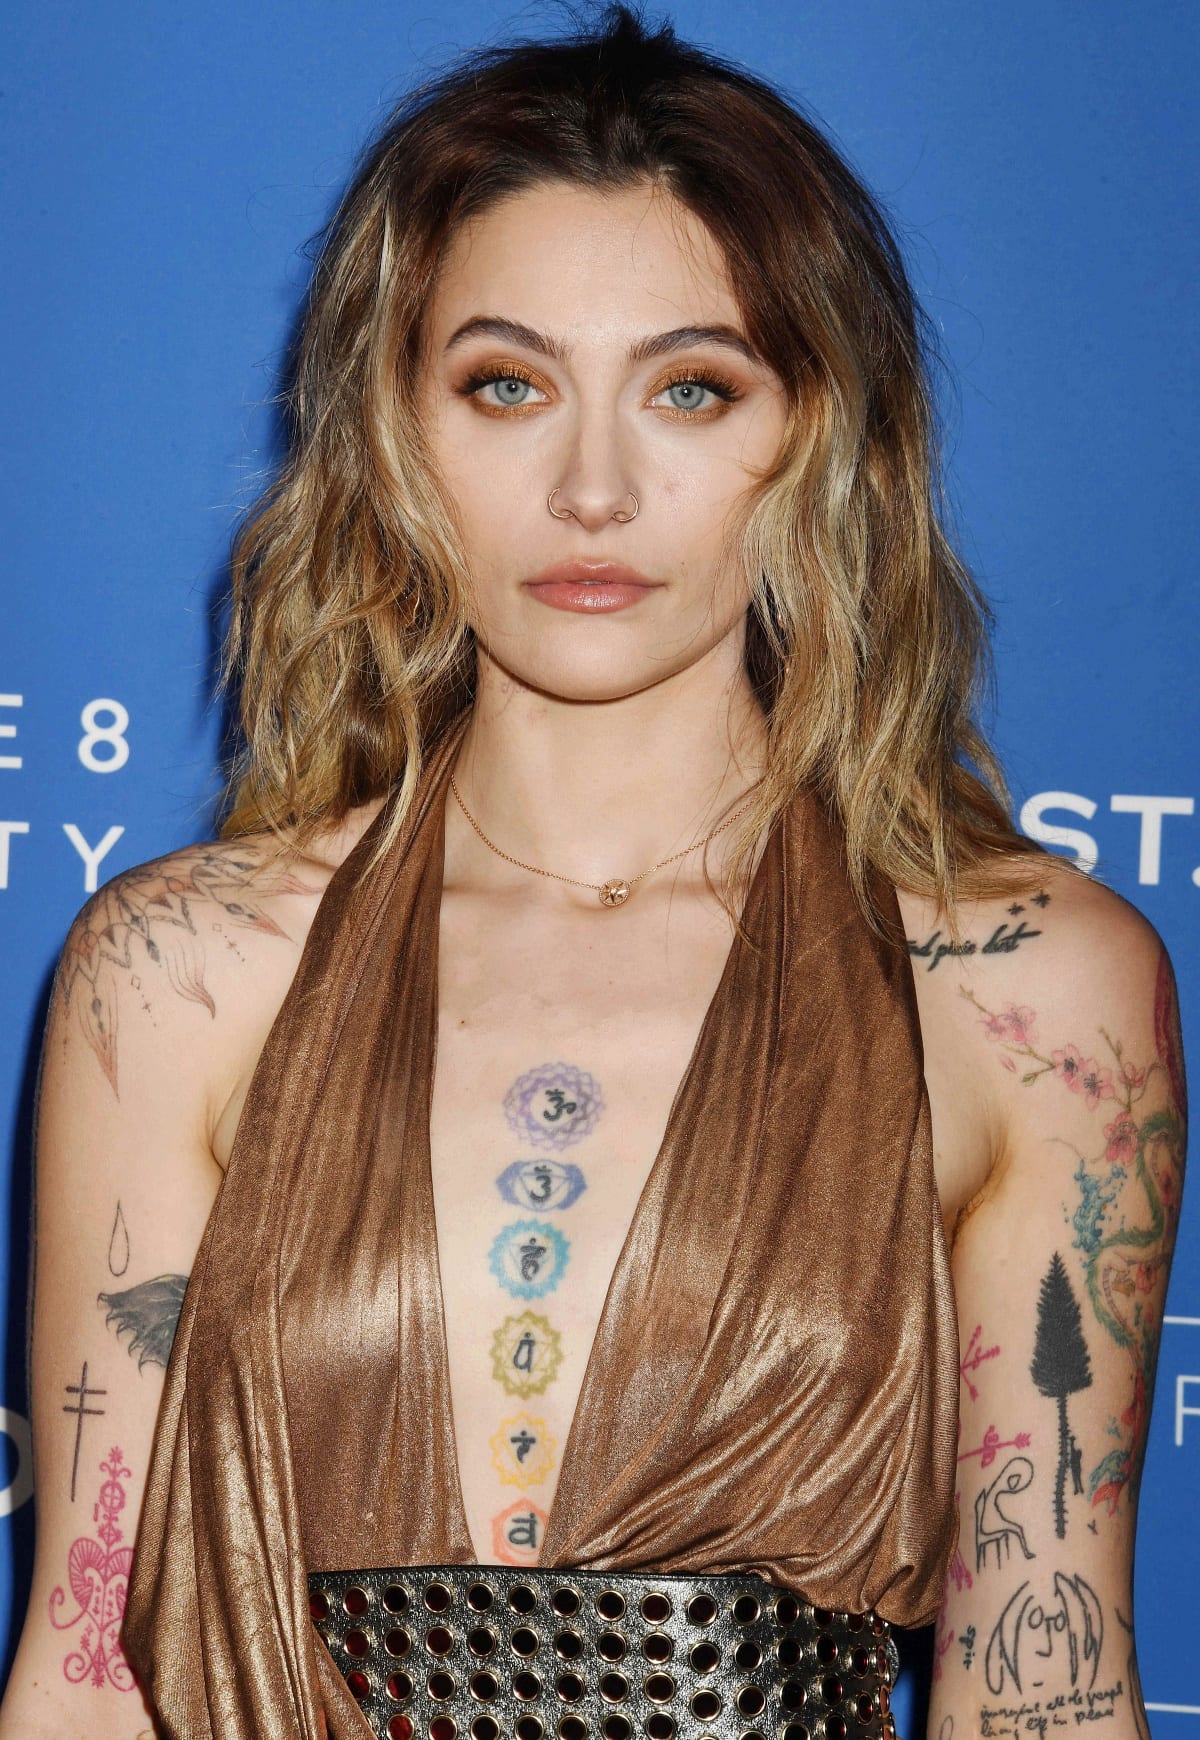 Paris Jackson’s dress also showcased her colorful tattoos, including the chakras down her chest